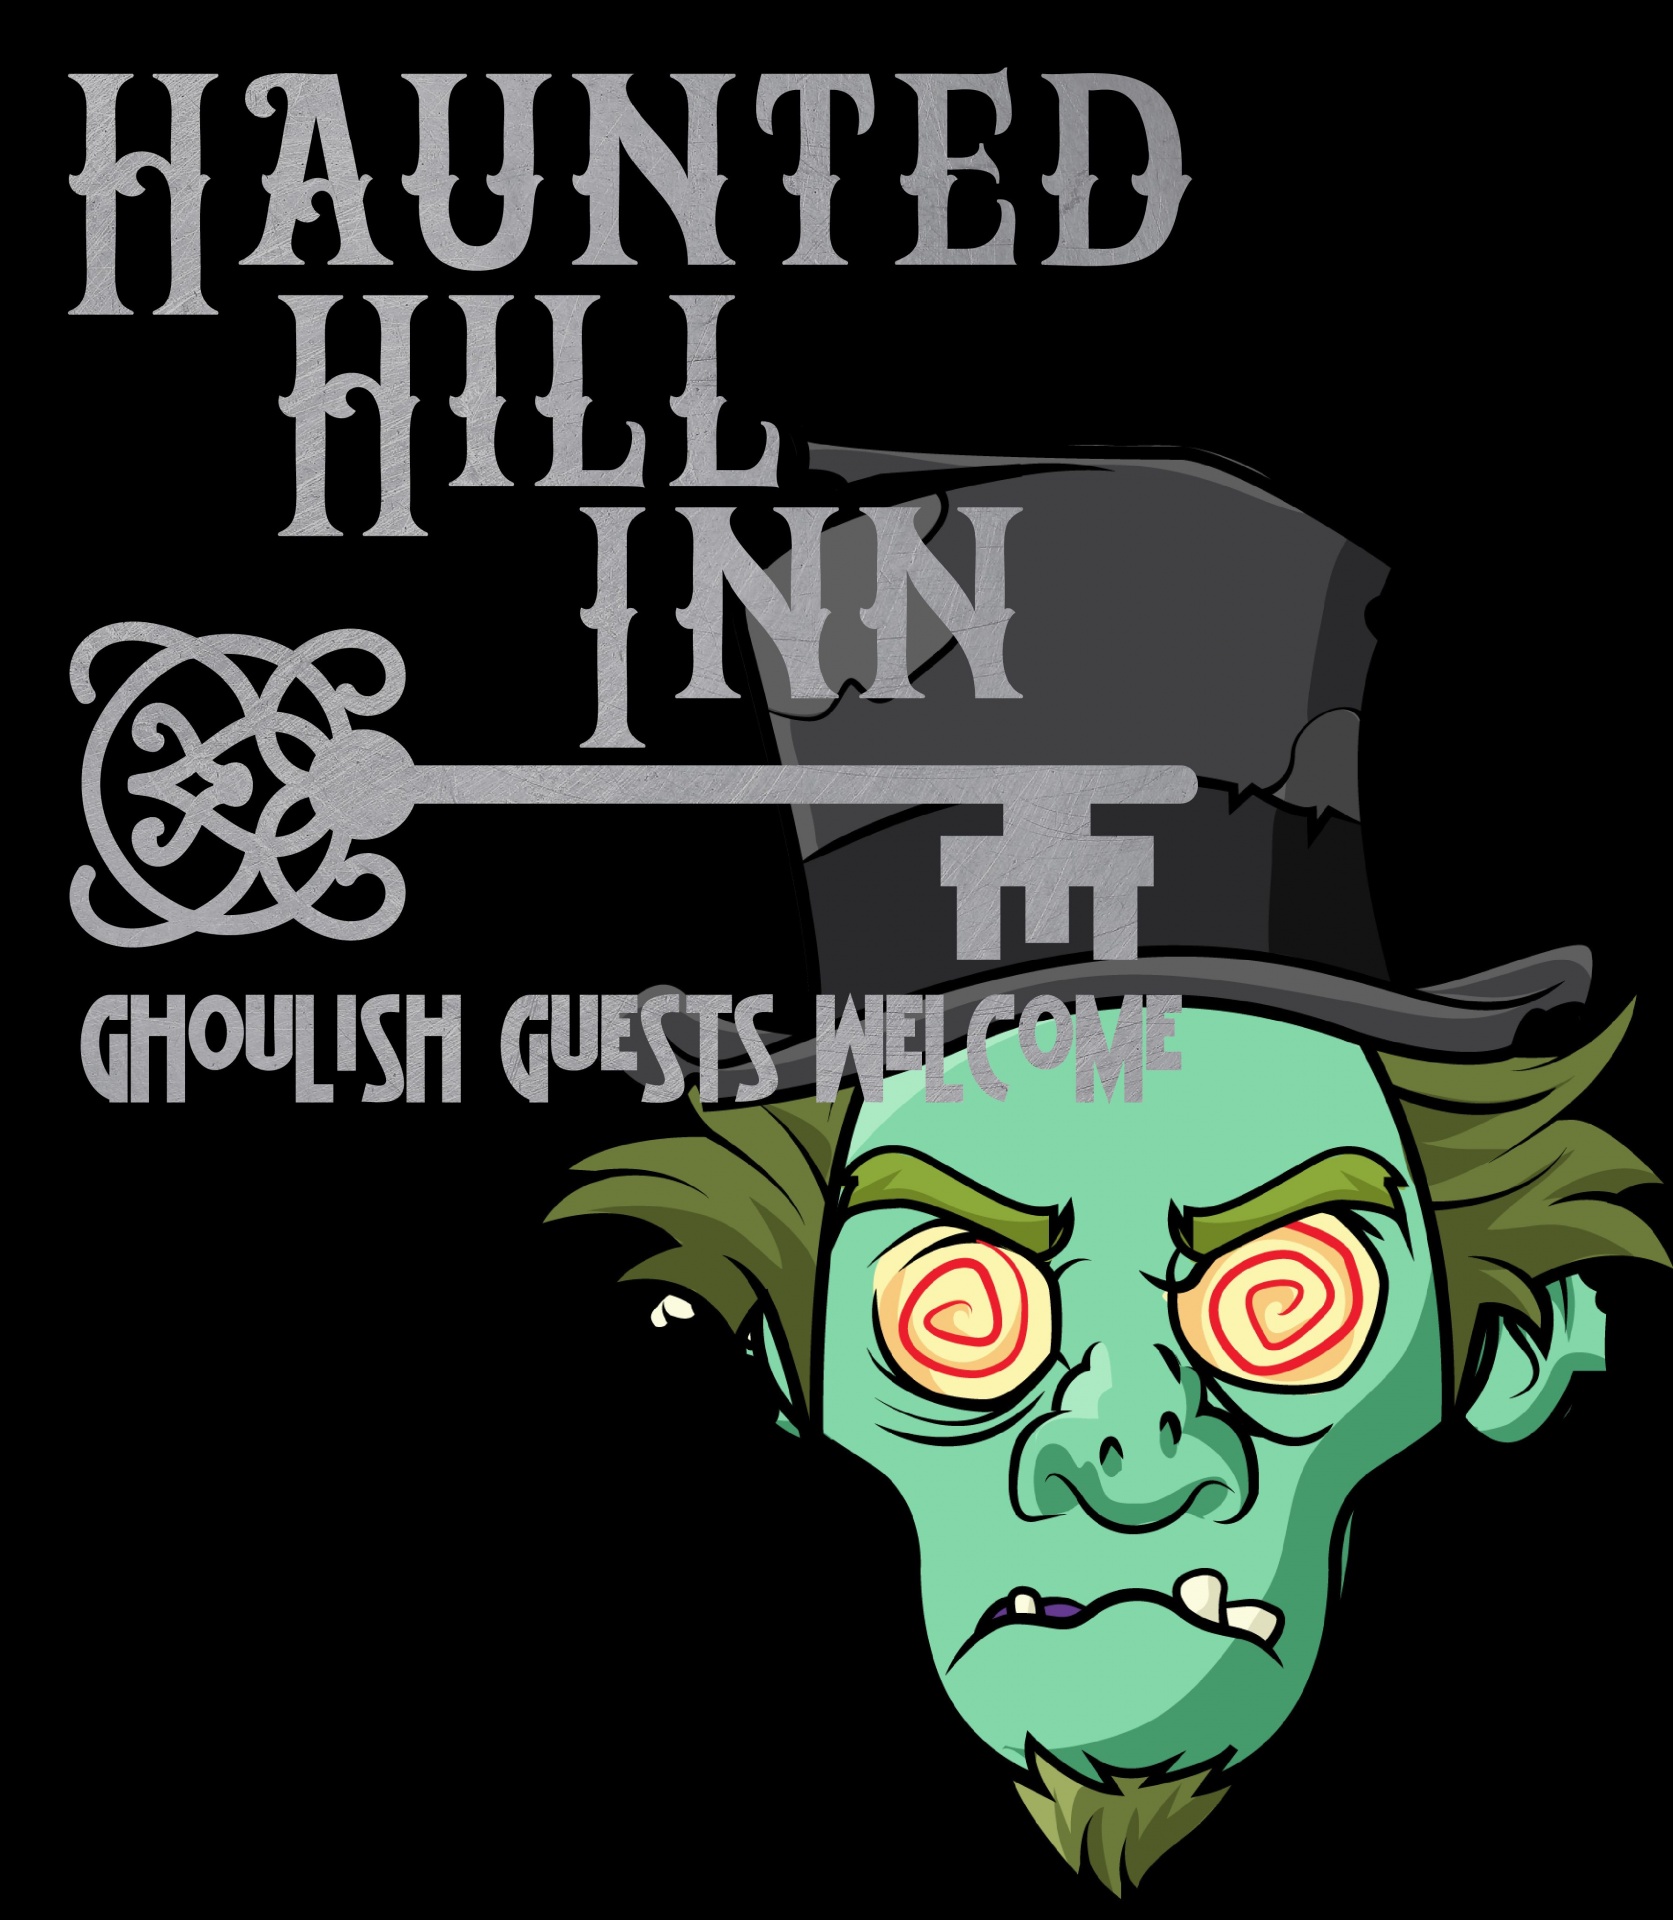 Haunted Inn sign with zombie cartoon face